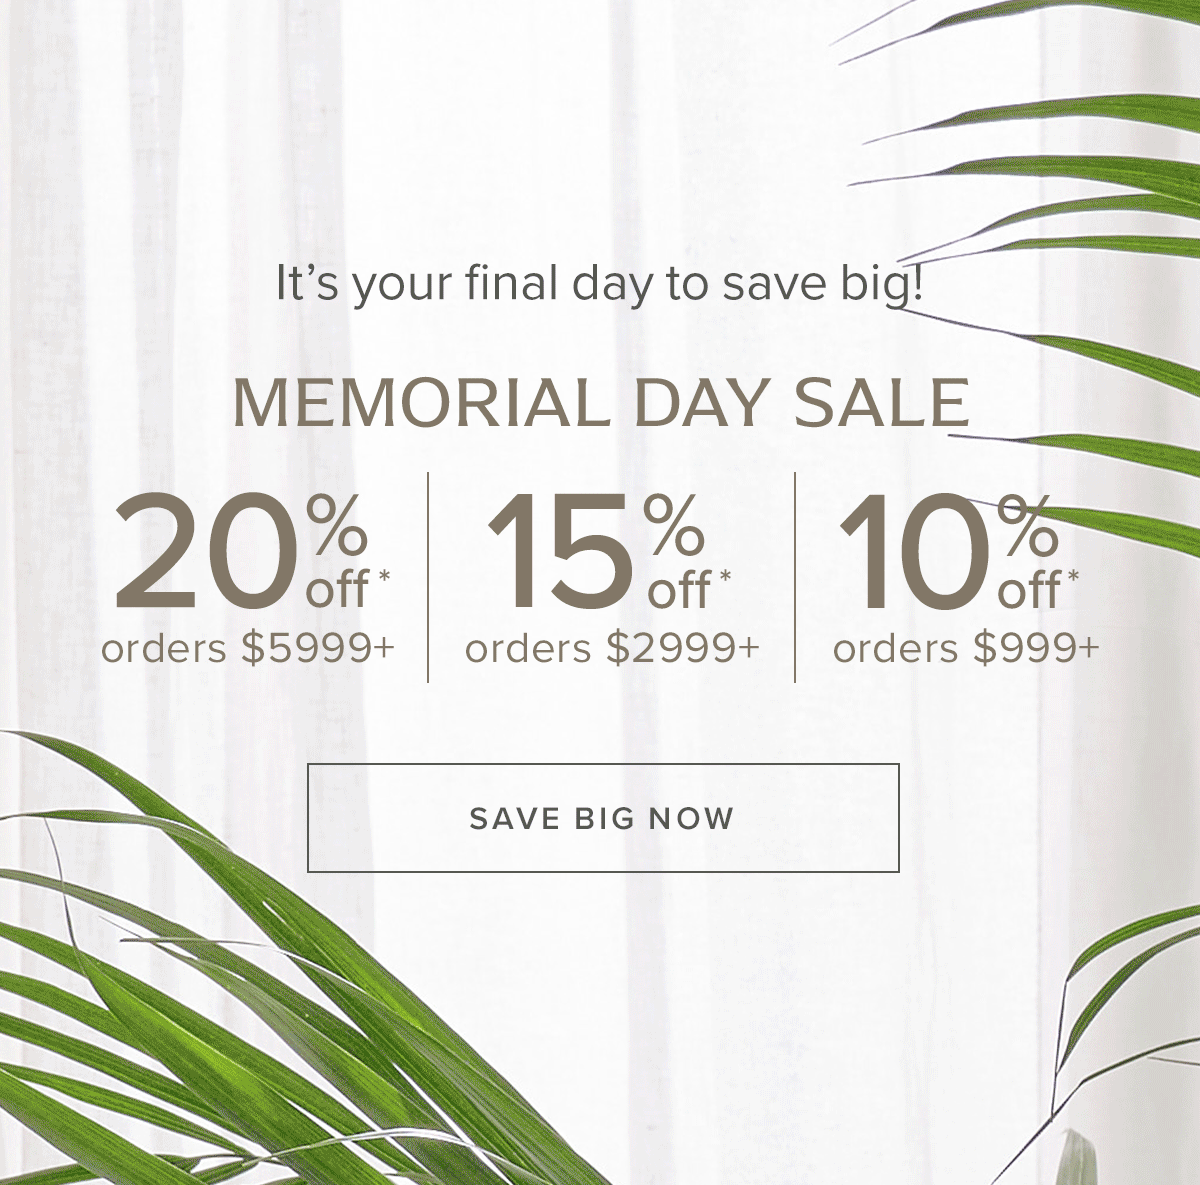 It's your final day to save! Memorial Day Sale